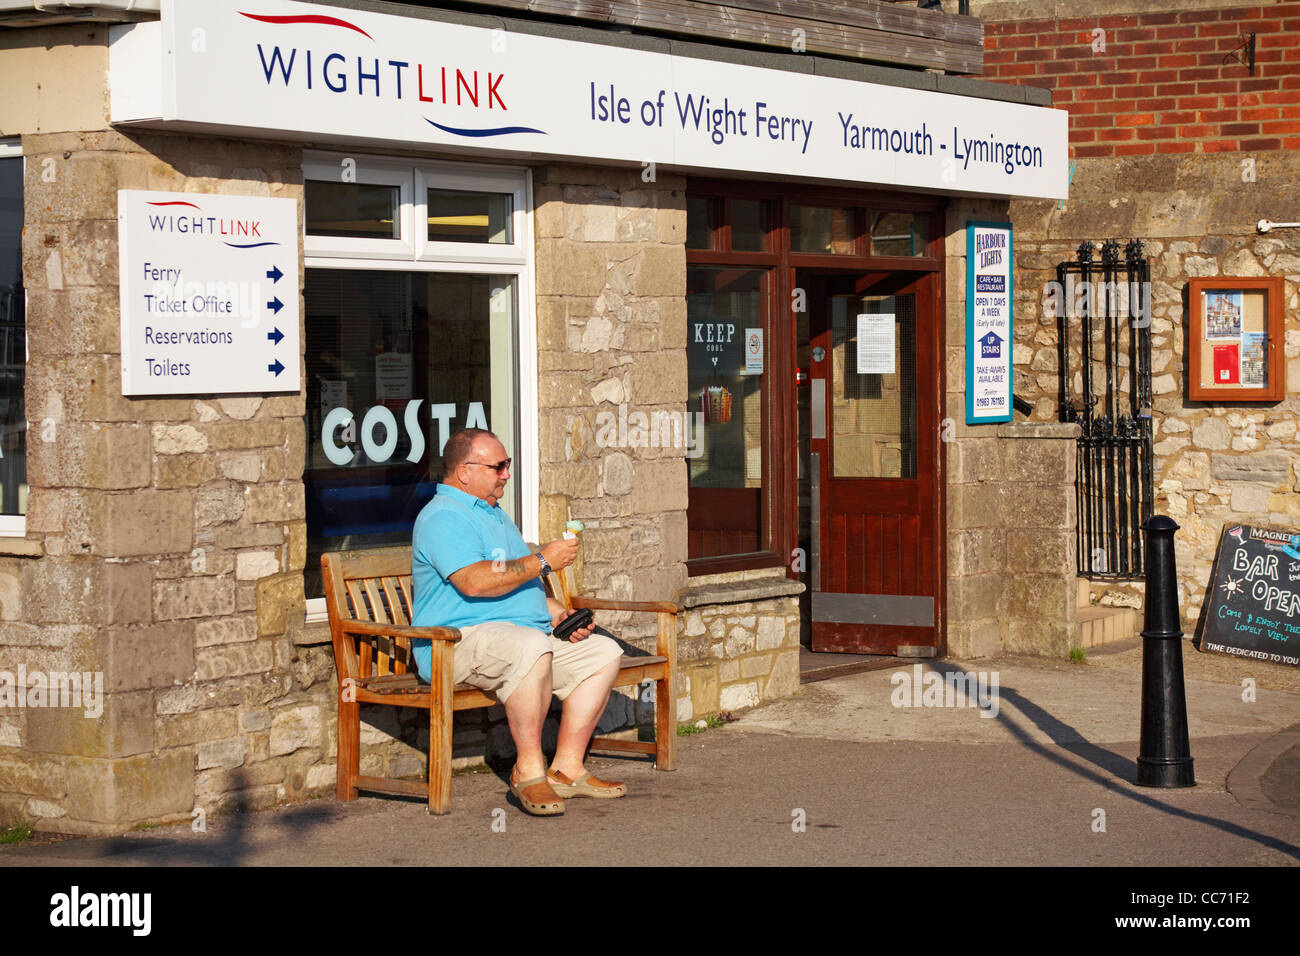 Mature man sat on bench enjoying an ice cream outside Wightlink ferry office at Yarmouth, Isle of Wight, Hampshire UK in September Stock Photo